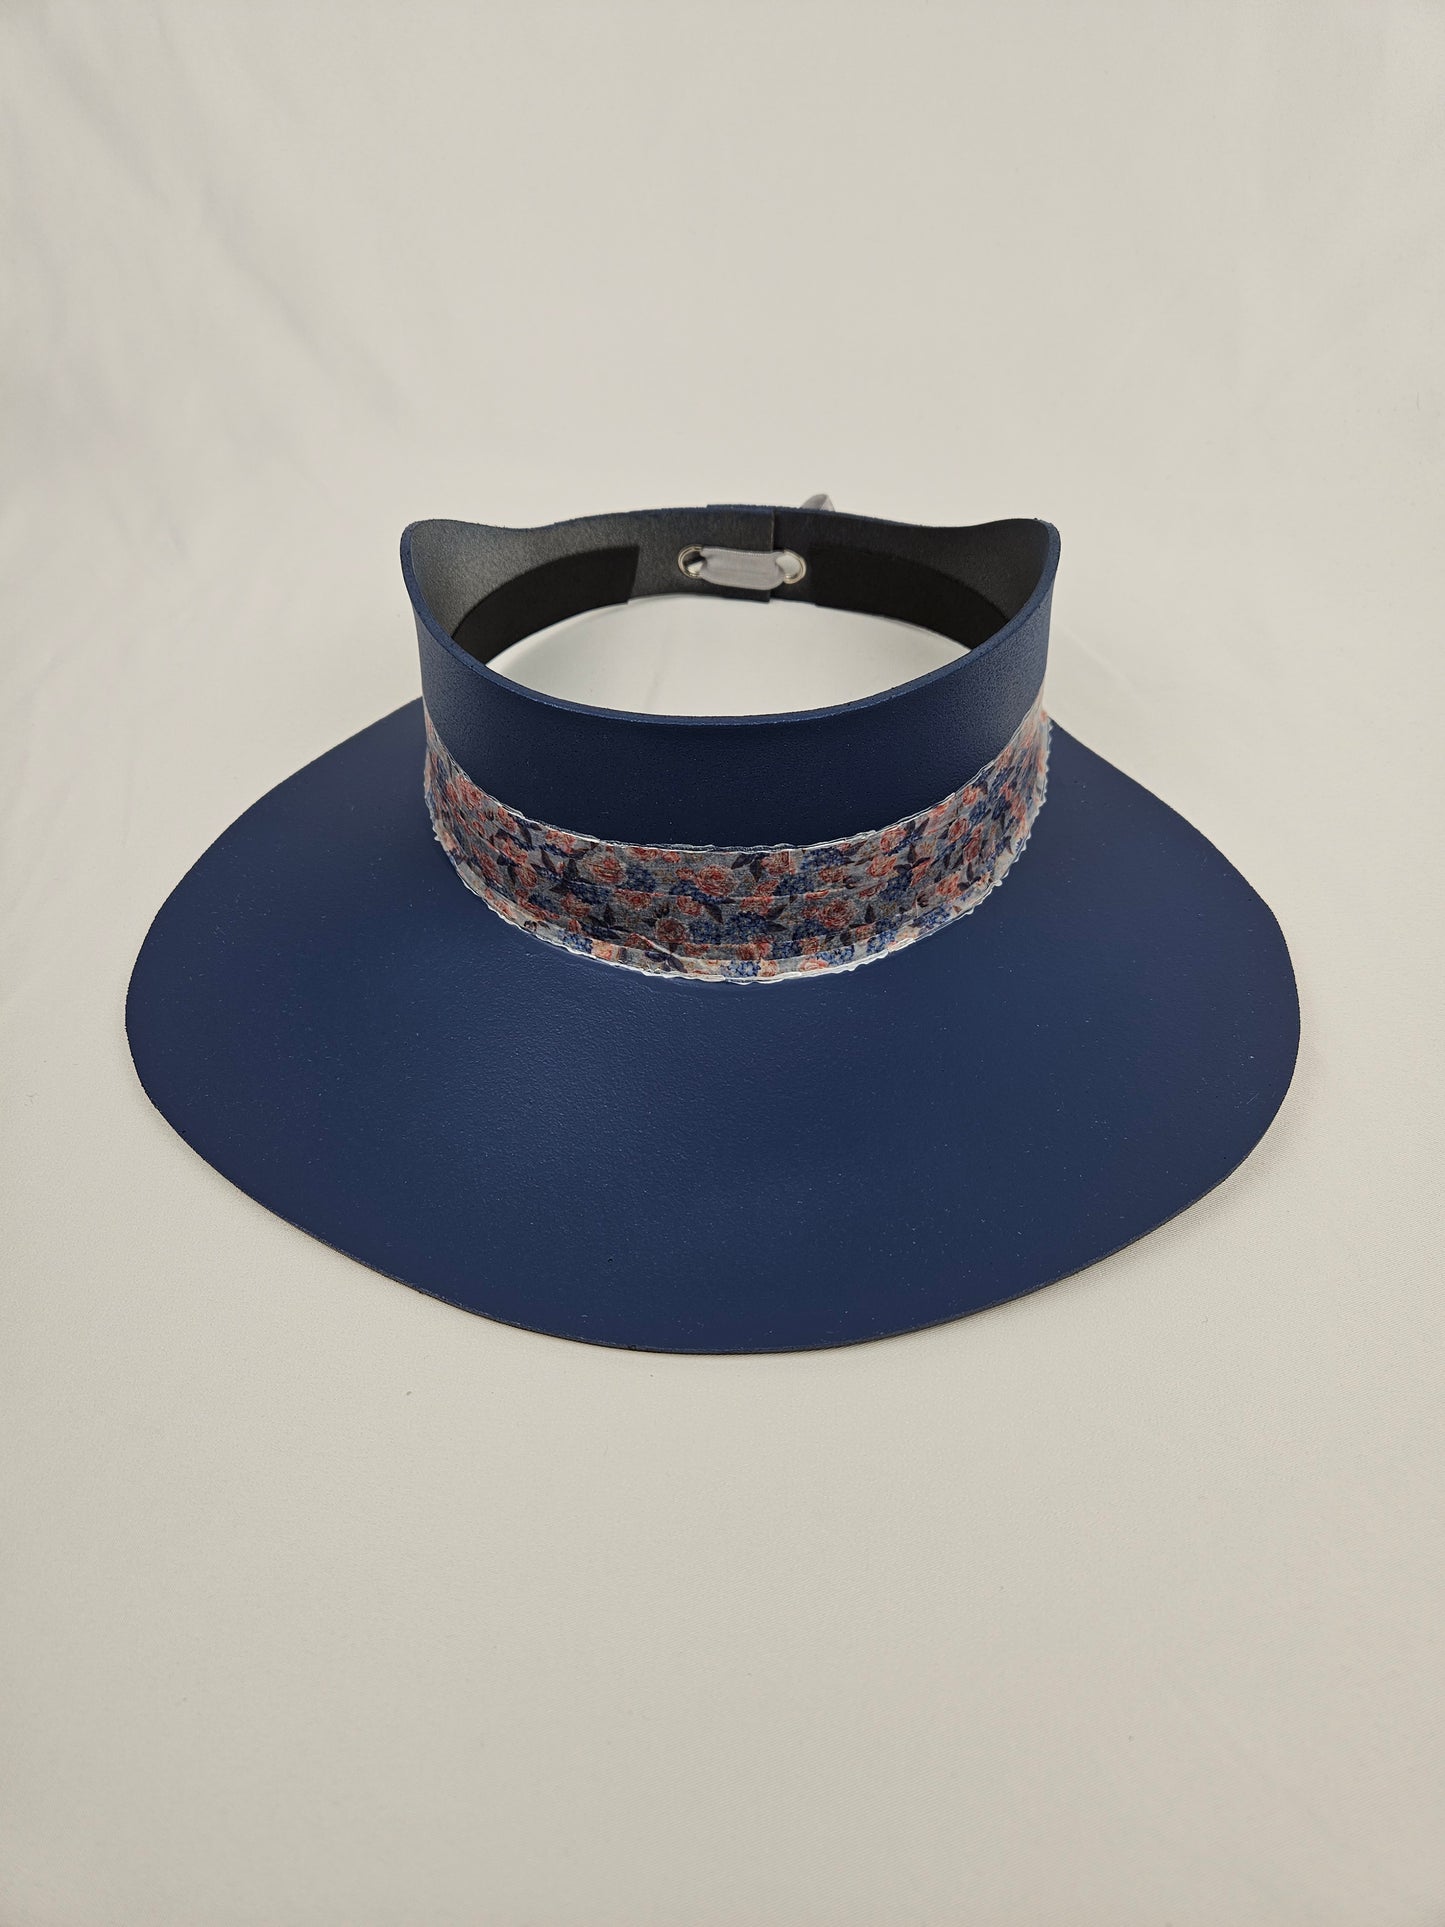 Tall Classic Navy Audrey Foam Sun Visor Hat with Pink and Blue Floral Band: Wide Brim, Golf, Swim, UV Resistant, No Headache